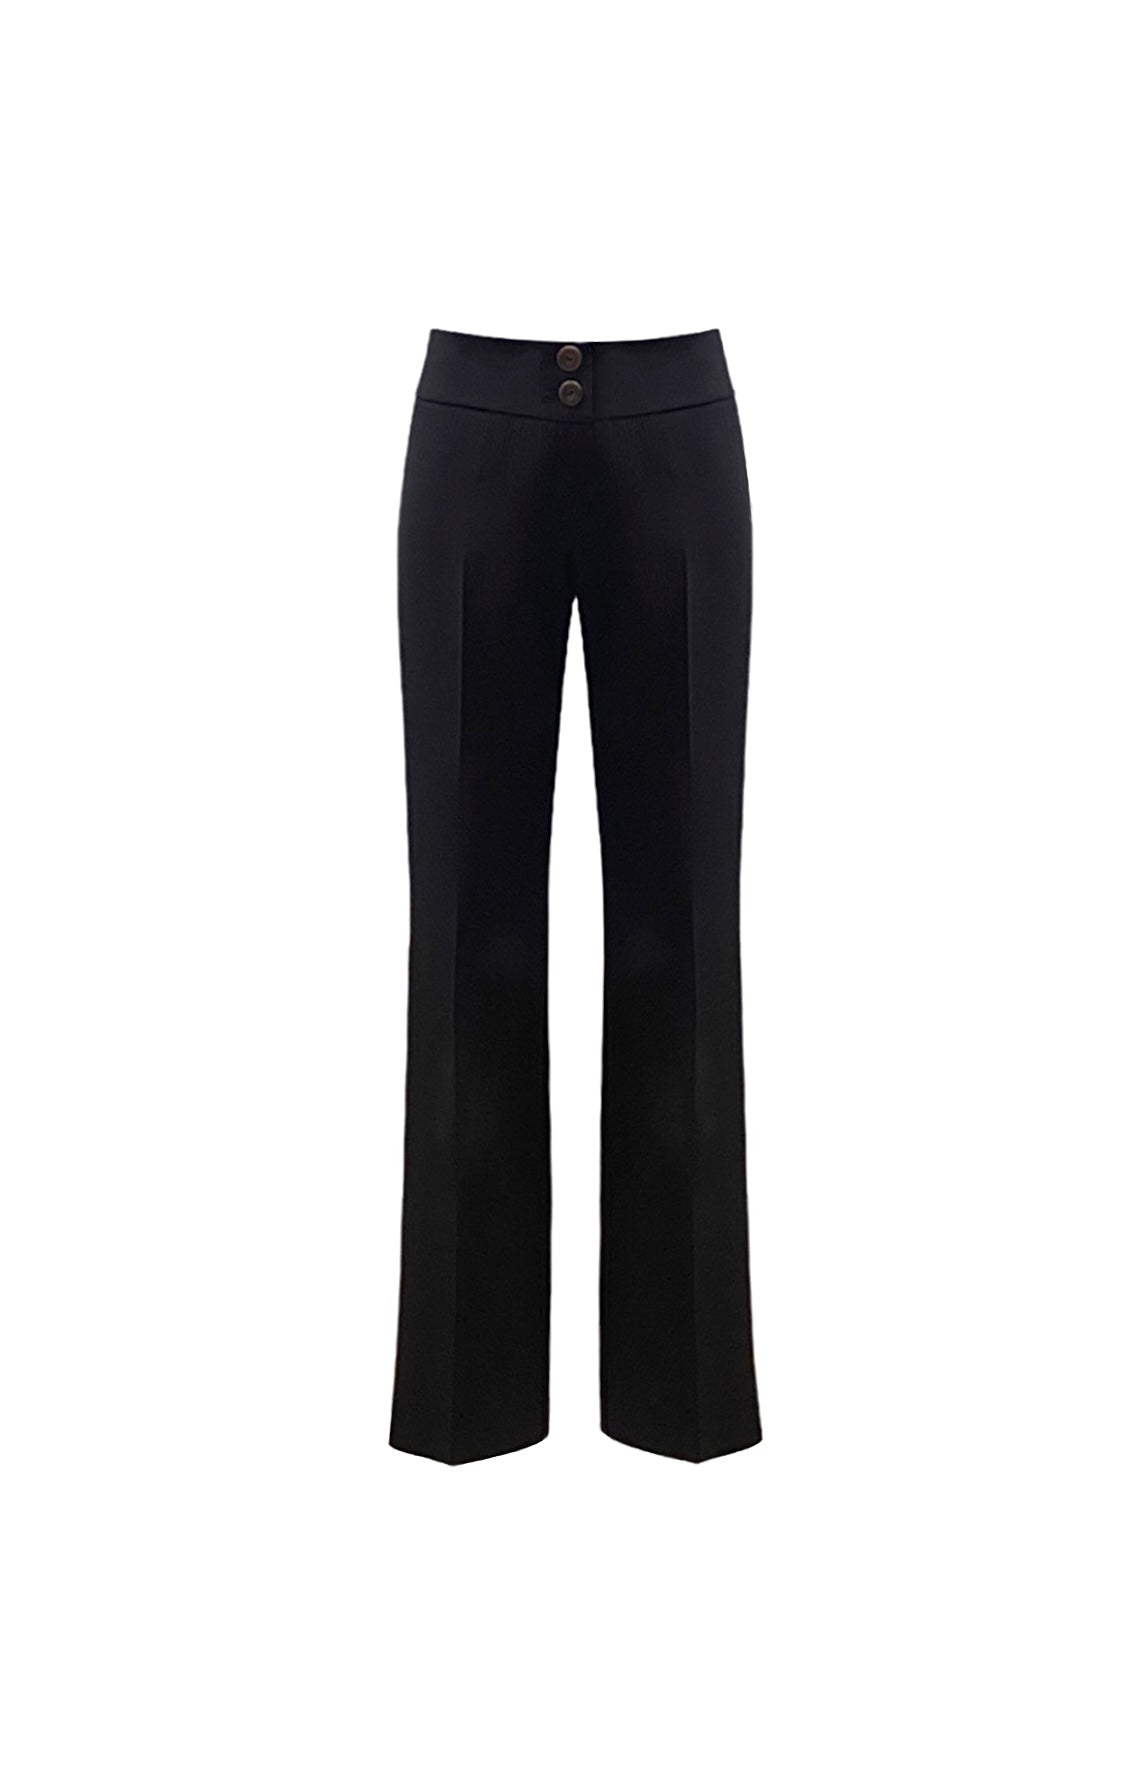 BLACK WOOL TROUSERS AW/22